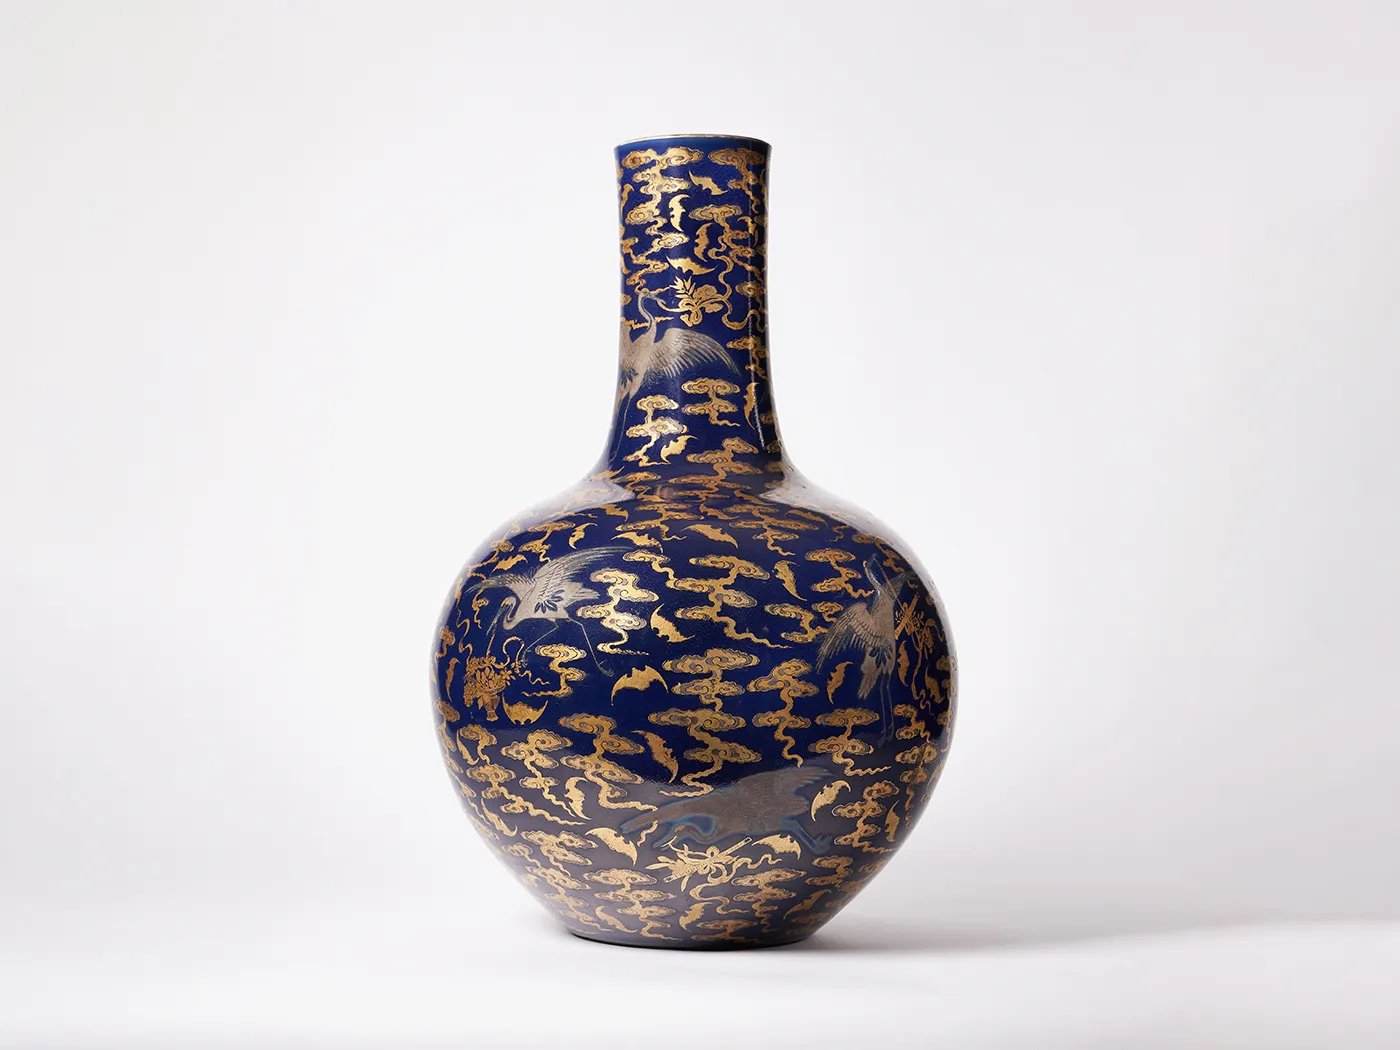 tvilling Staple kapillærer A Vase Kept in an Ordinary Kitchen Turned Out to Be a Qing-Dynasty Artwork  Worth Millions | Smart News| Smithsonian Magazine